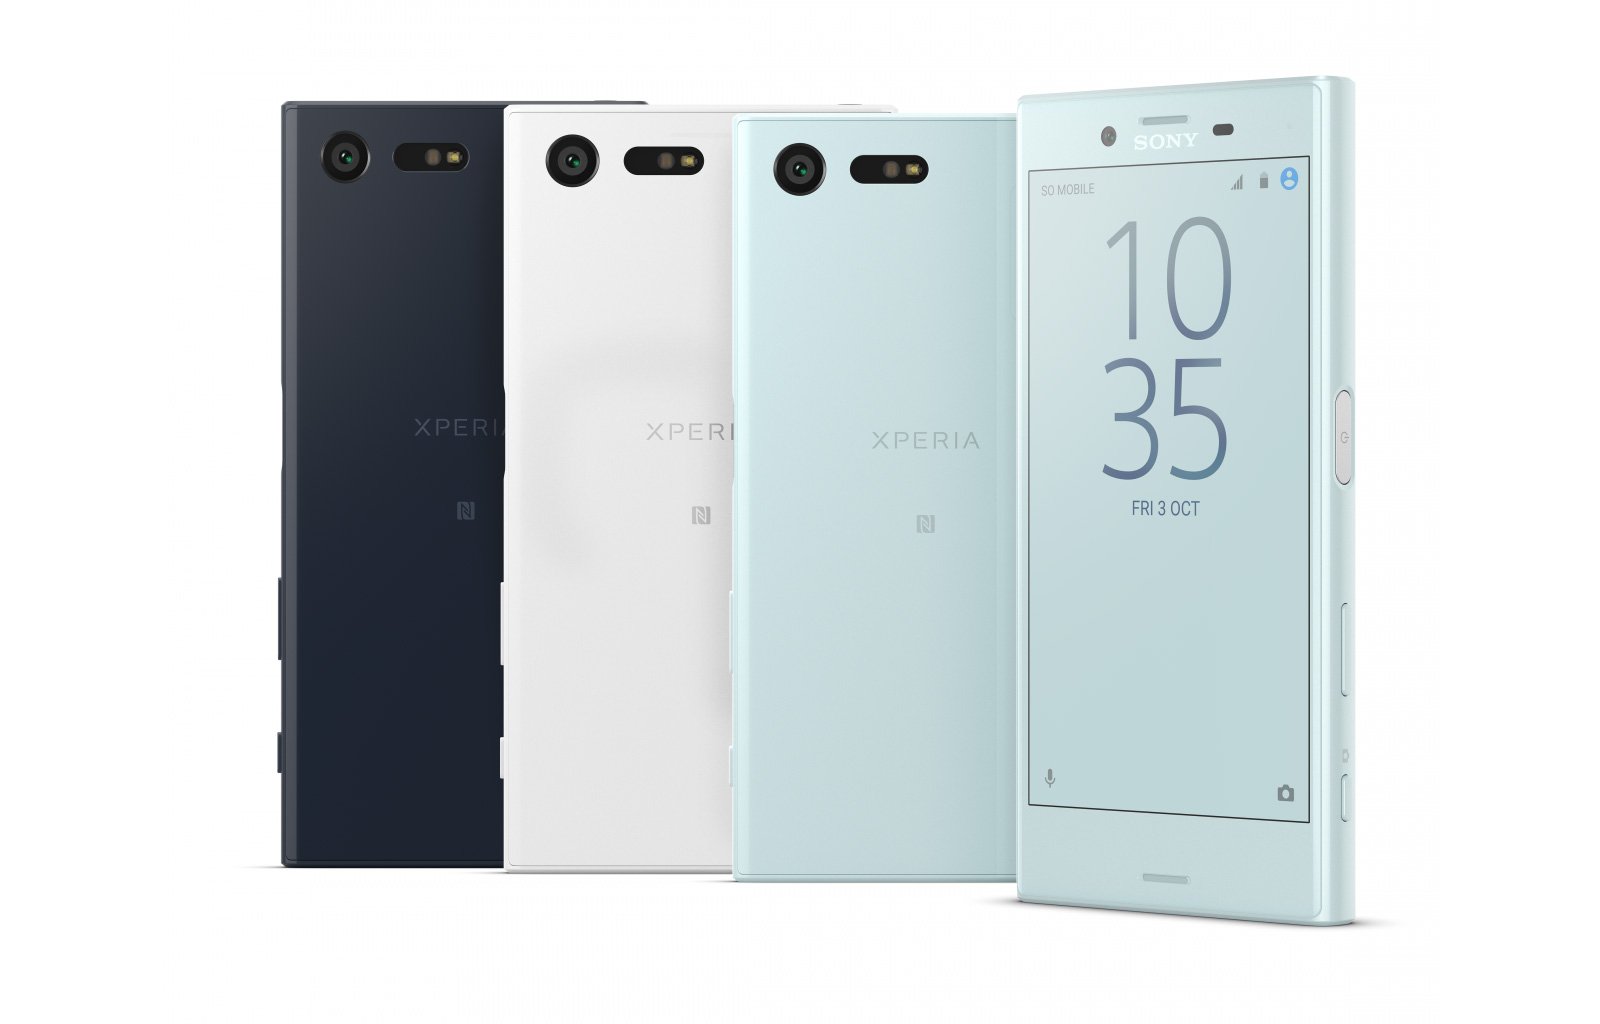 Sony Xperia Compact phone with 5.5-inch screen and Snapdragon 775 could be in works